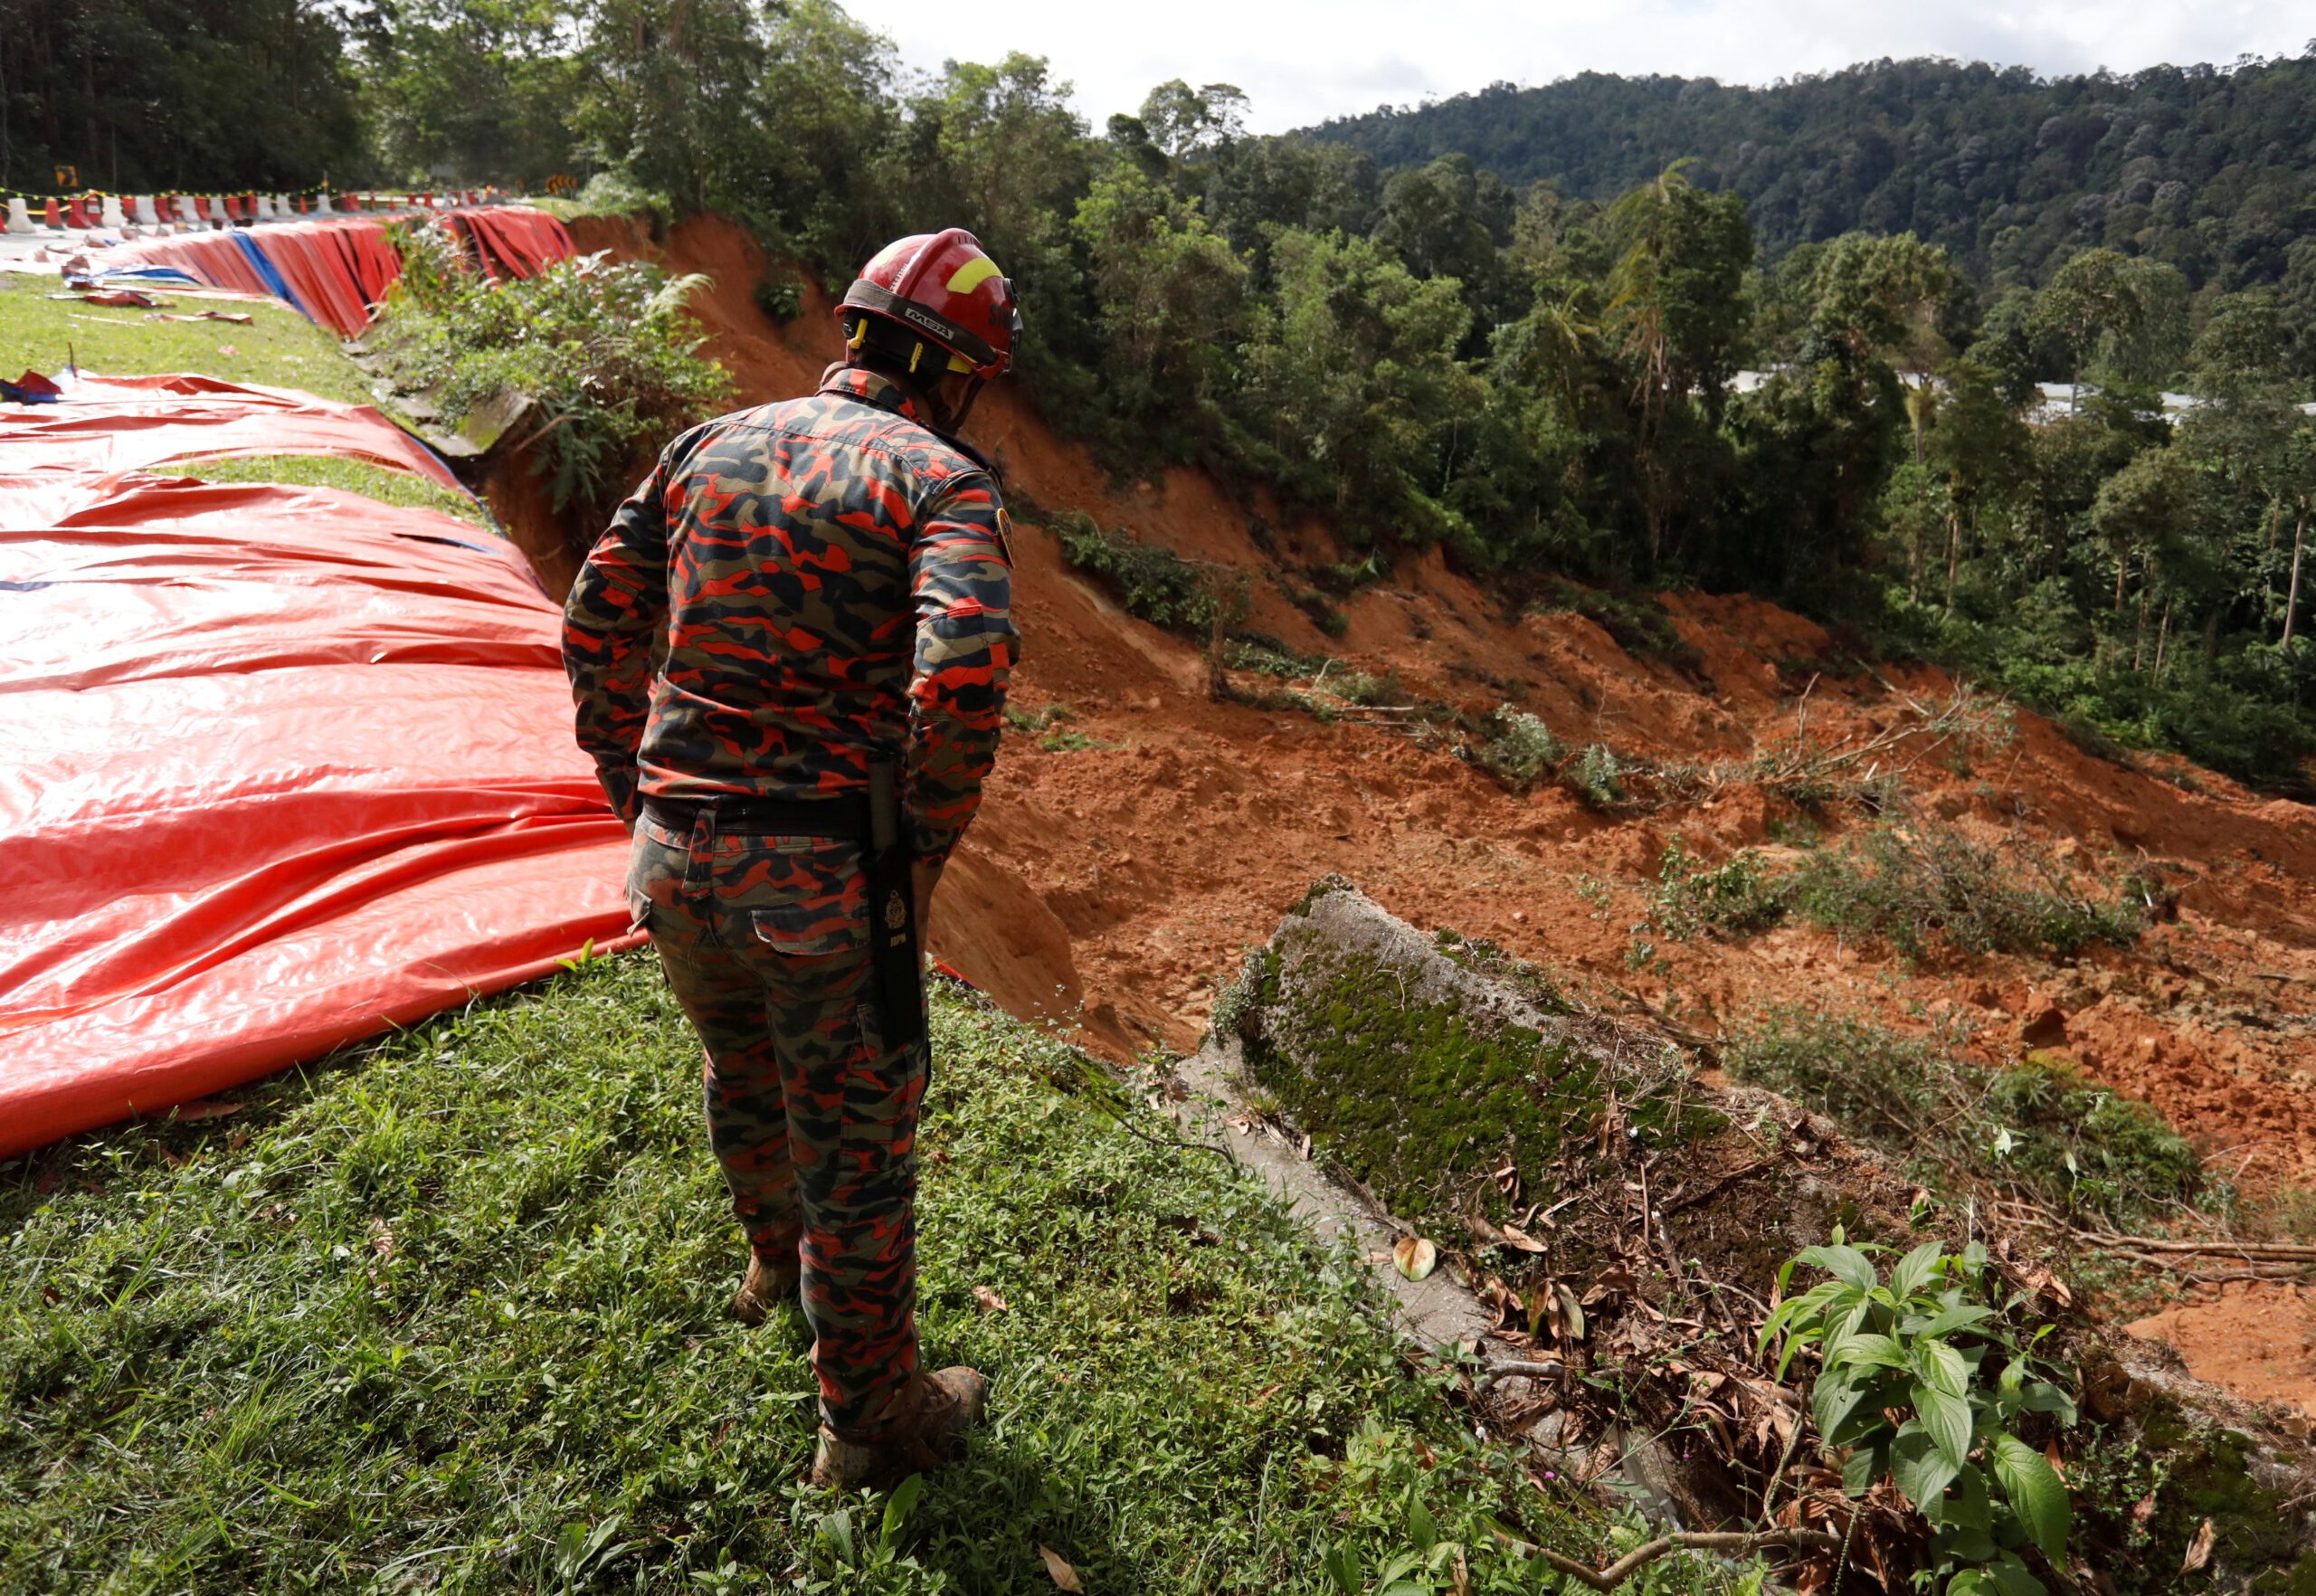 Malaysia campsite search continues as 12 still missing after deadly landslide